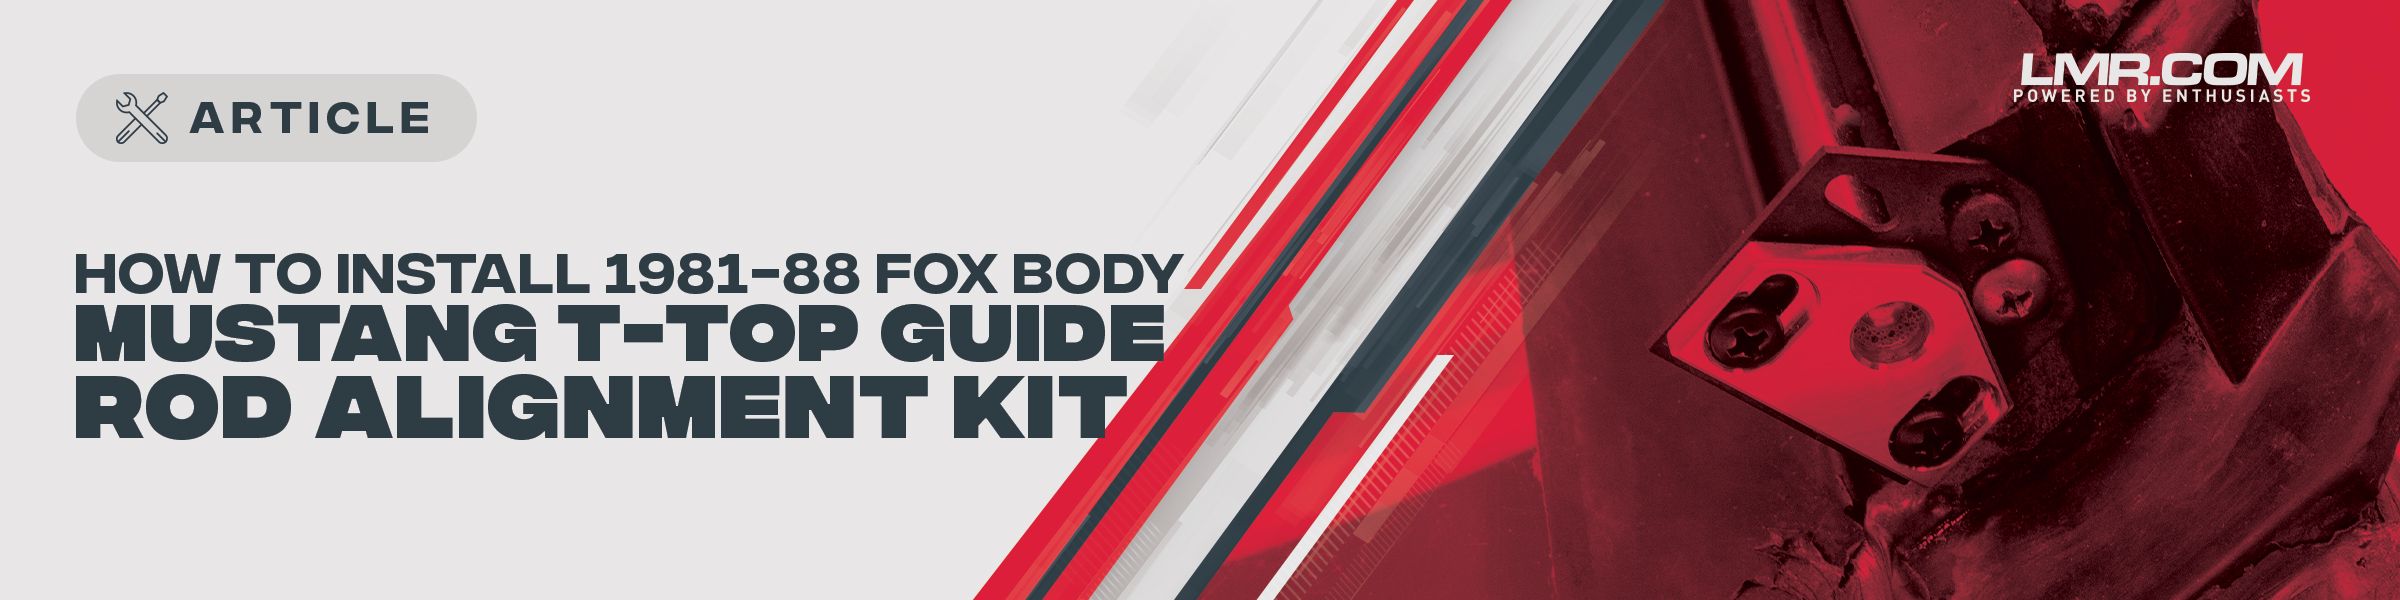 How To Install Fox Body Mustang T-Top Guide Rod Alignment Kit | 83-88 - How To Install Fox Body Mustang T-Top Guide Rod Alignment Kit | 83-88